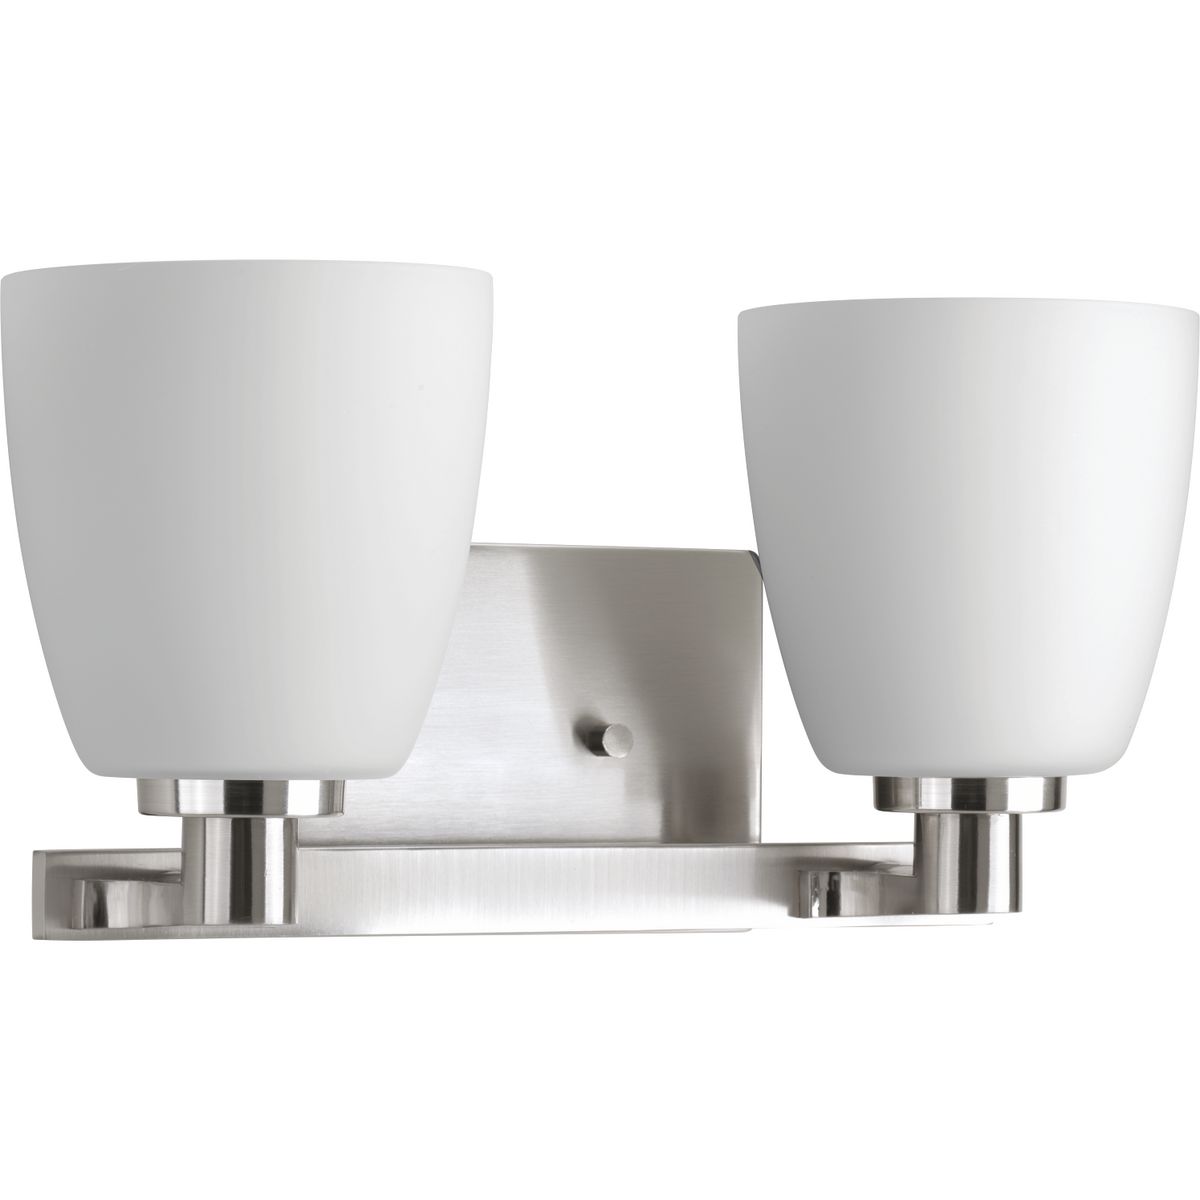 P2166-09 785247193660 The two-light bath fixture emulates European faucet designs. Fleet is compromised of a distinct die cast arm and cup and highlighted by etched opal glass. Complimented by a Polished Chrome finish.